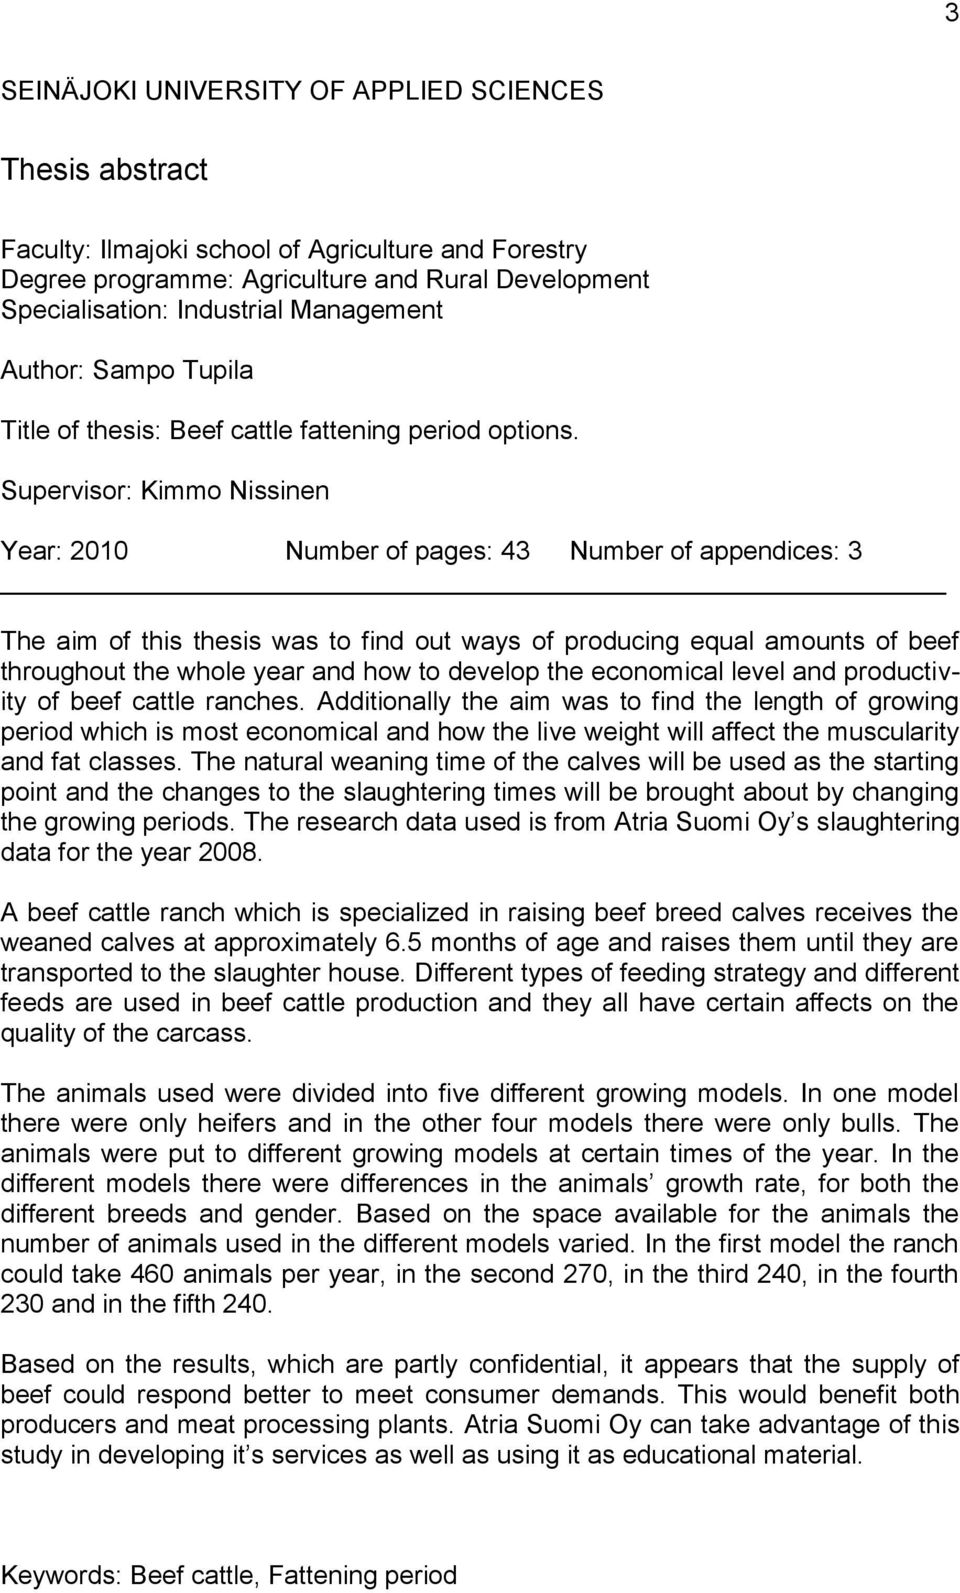 Supervisor: Kimmo Nissinen Year: 2010 Number of pages: 43 Number of appendices: 3 The aim of this thesis was to find out ways of producing equal amounts of beef throughout the whole year and how to